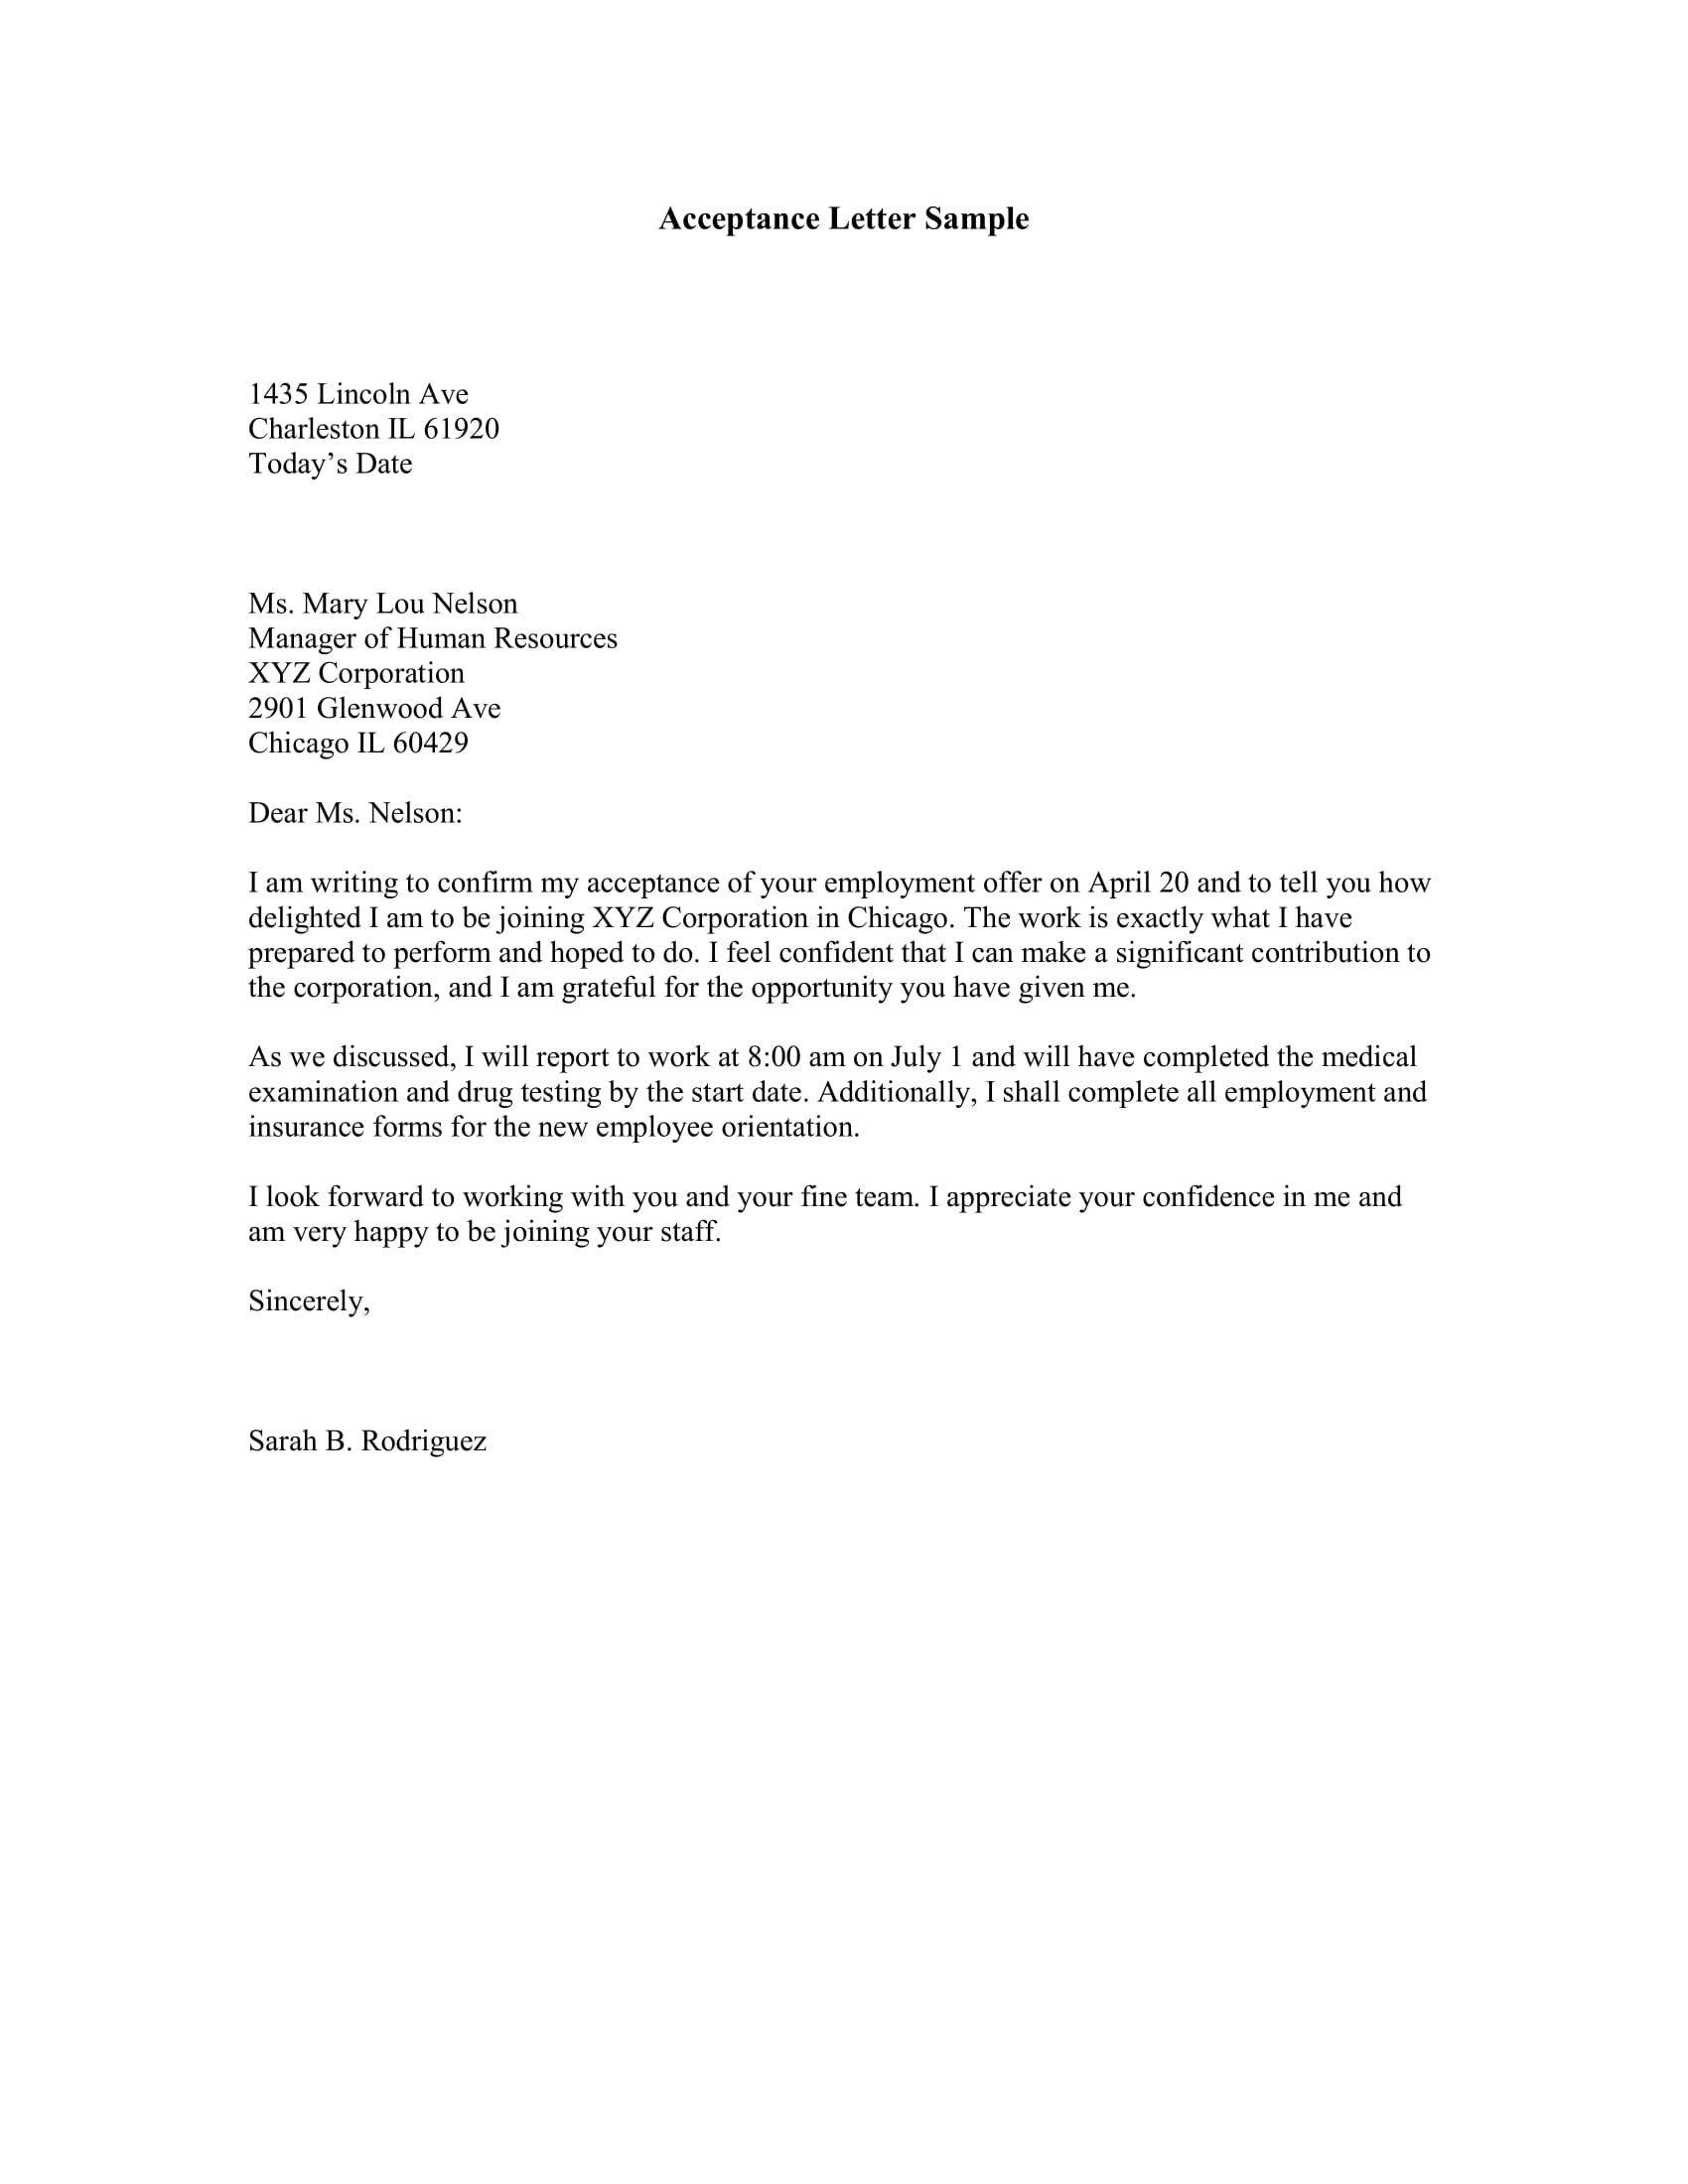 Proper Professional Letter Format from images.examples.com